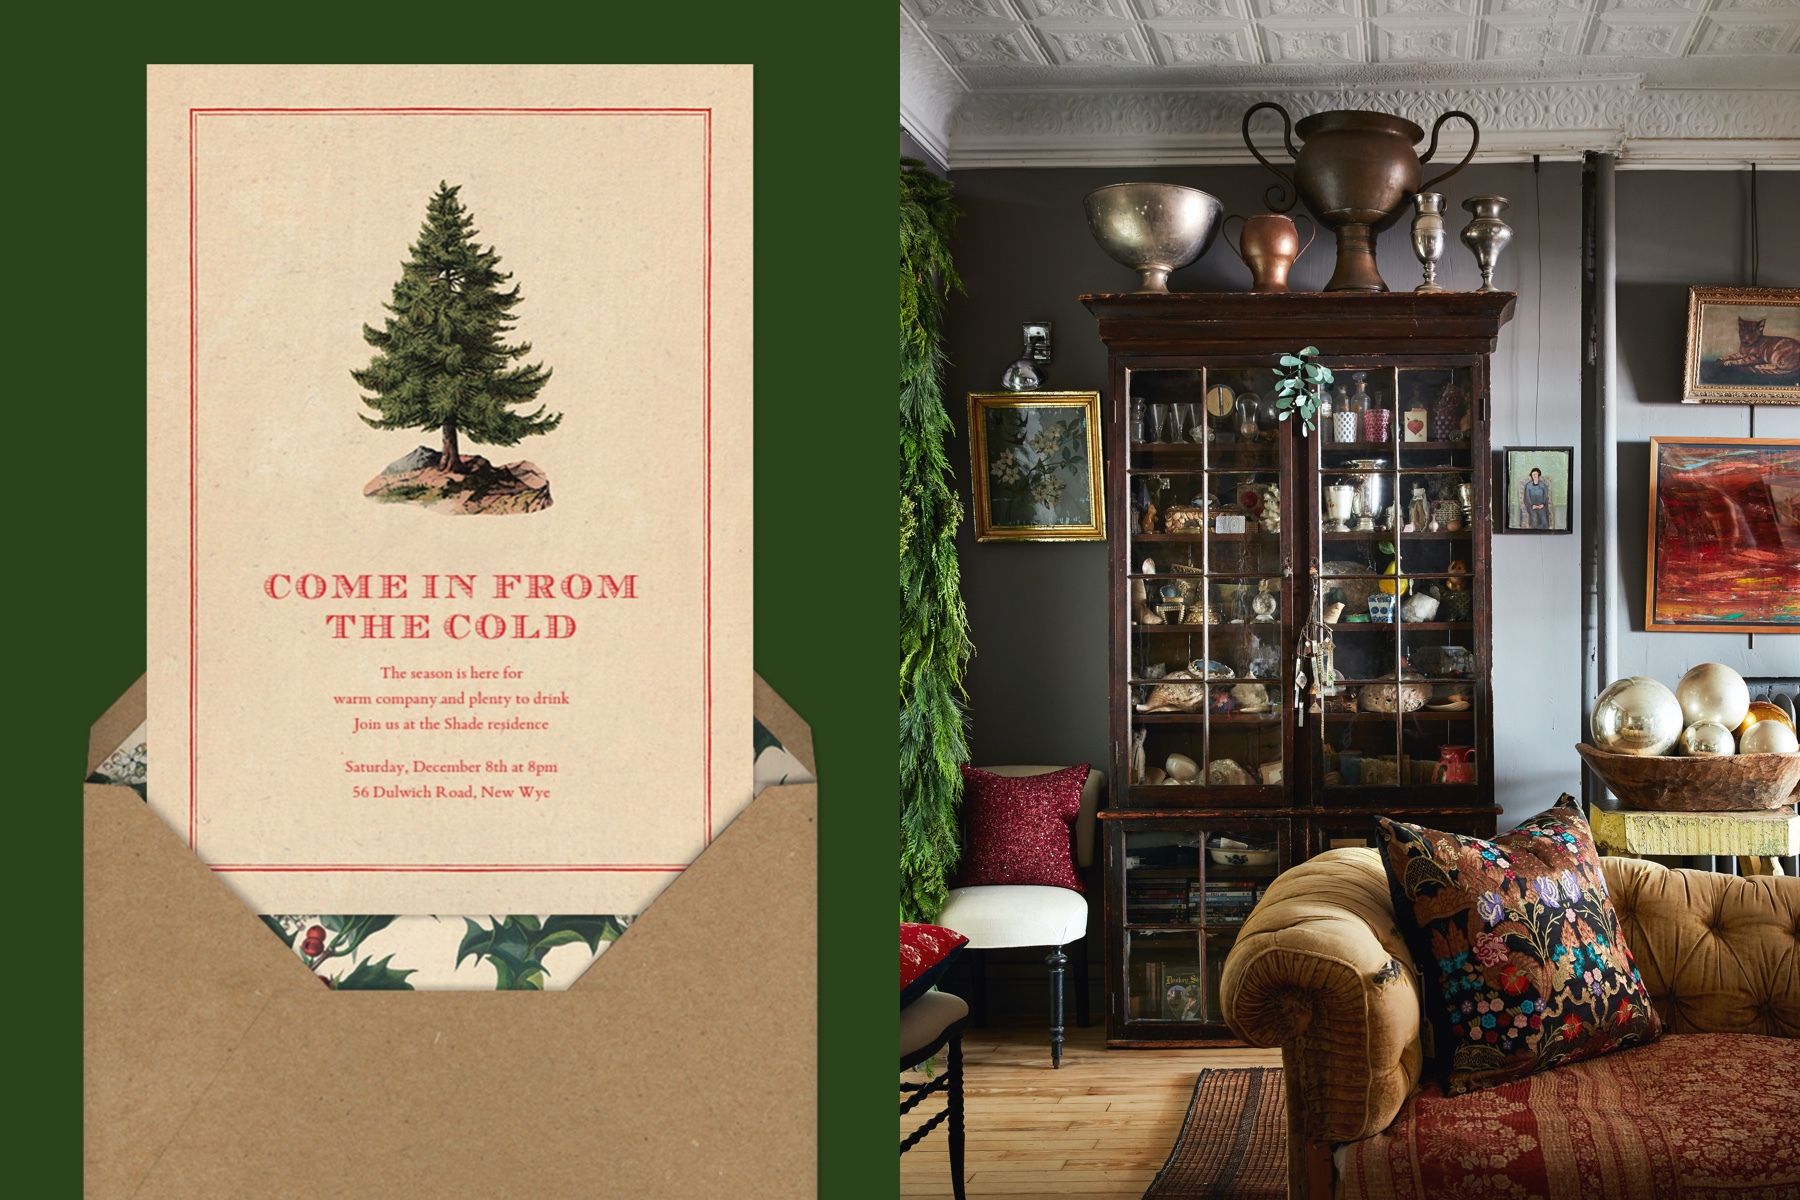 Left: A holiday invitation featuring a vintage tree illustration. Right: A corner of John Derian’s home decorated for the holidays.